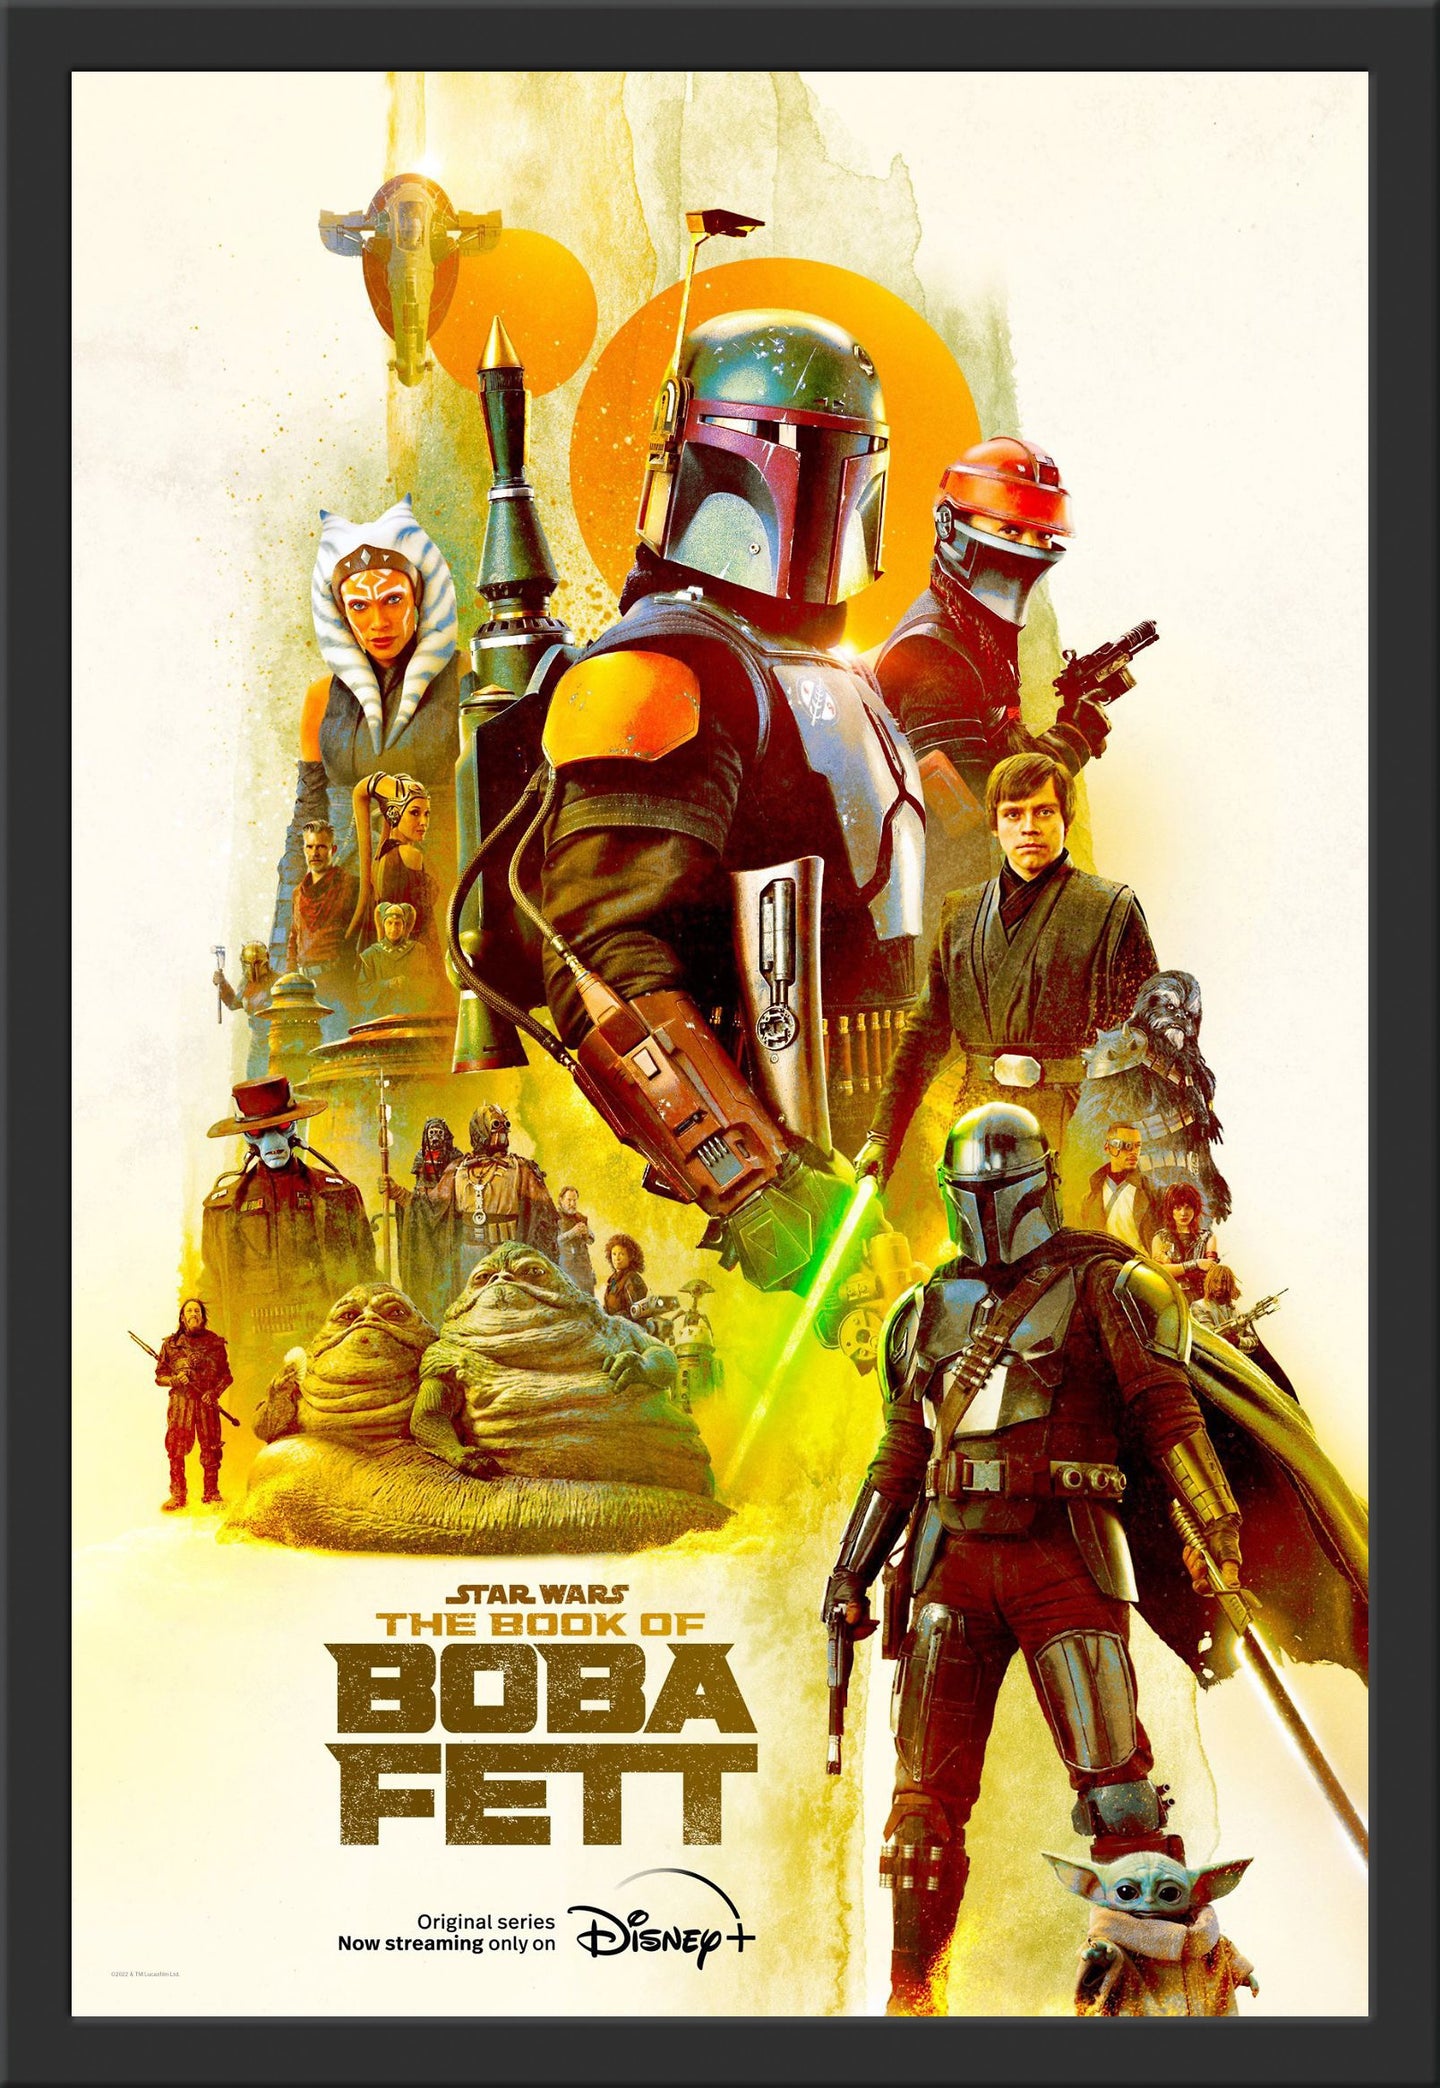 An original movie poster for the Disney+ TV series The Book of Boba Fett